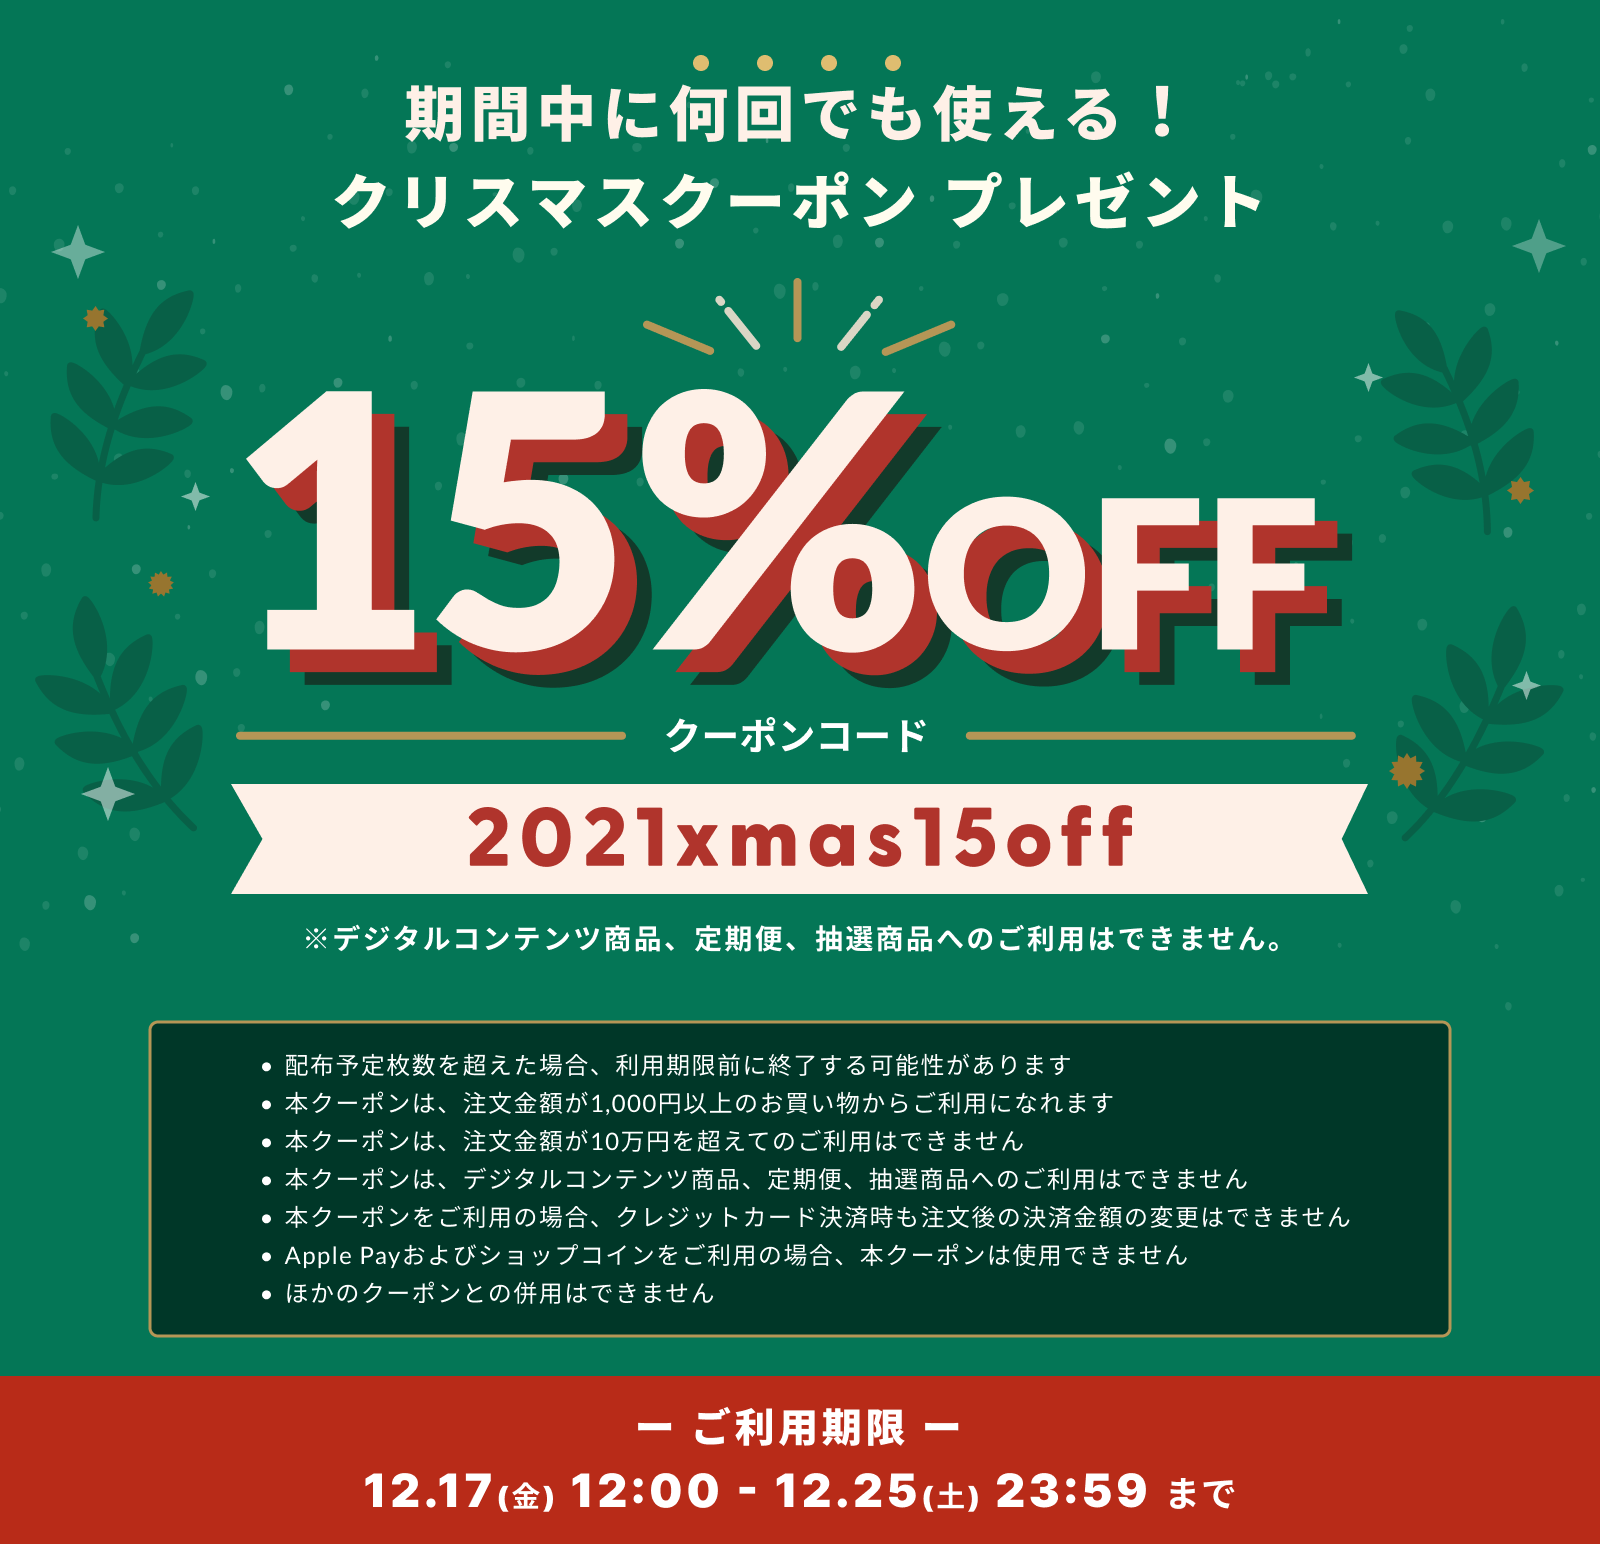 Xmas coupon 12/17-12/19 only 3 days open